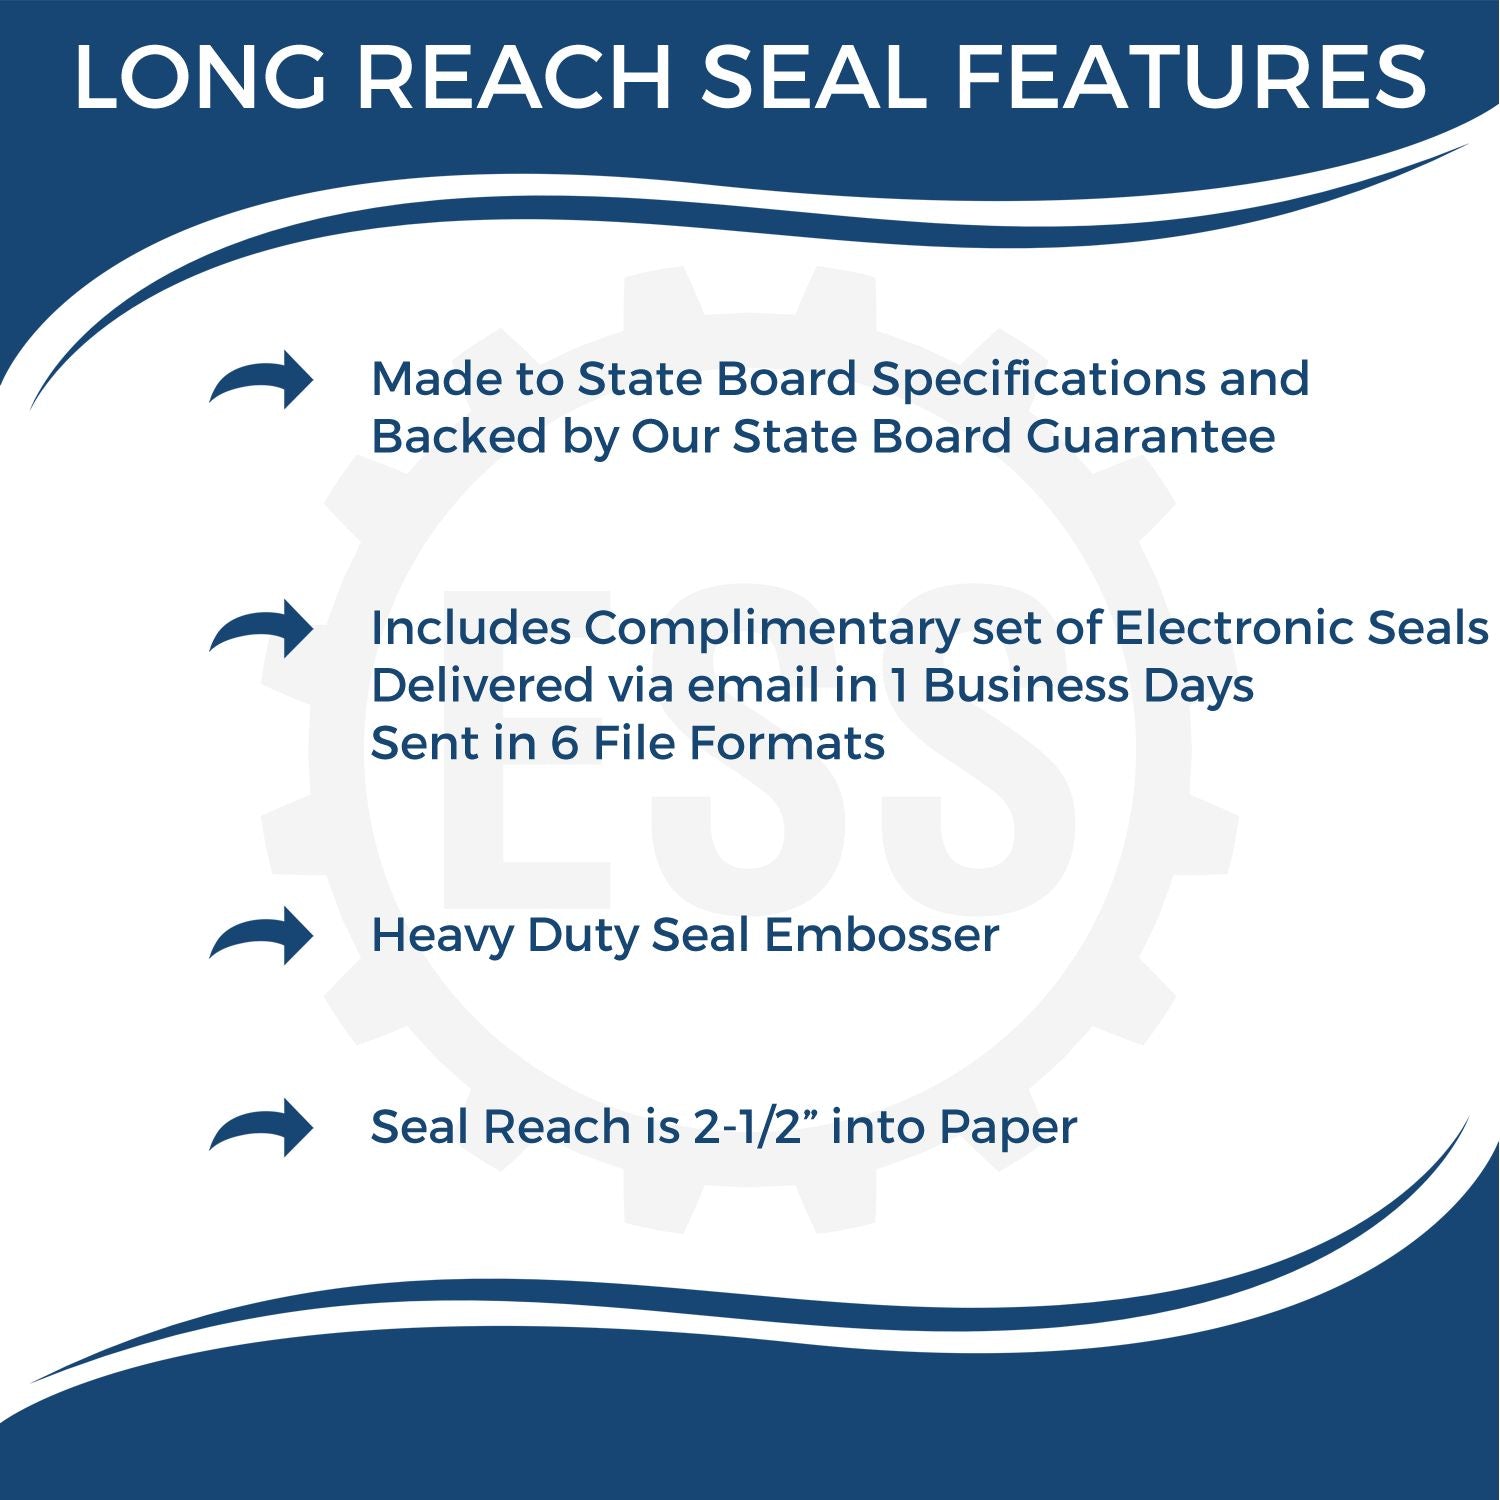 The main image for the Long Reach Wyoming PE Seal depicting a sample of the imprint and electronic files